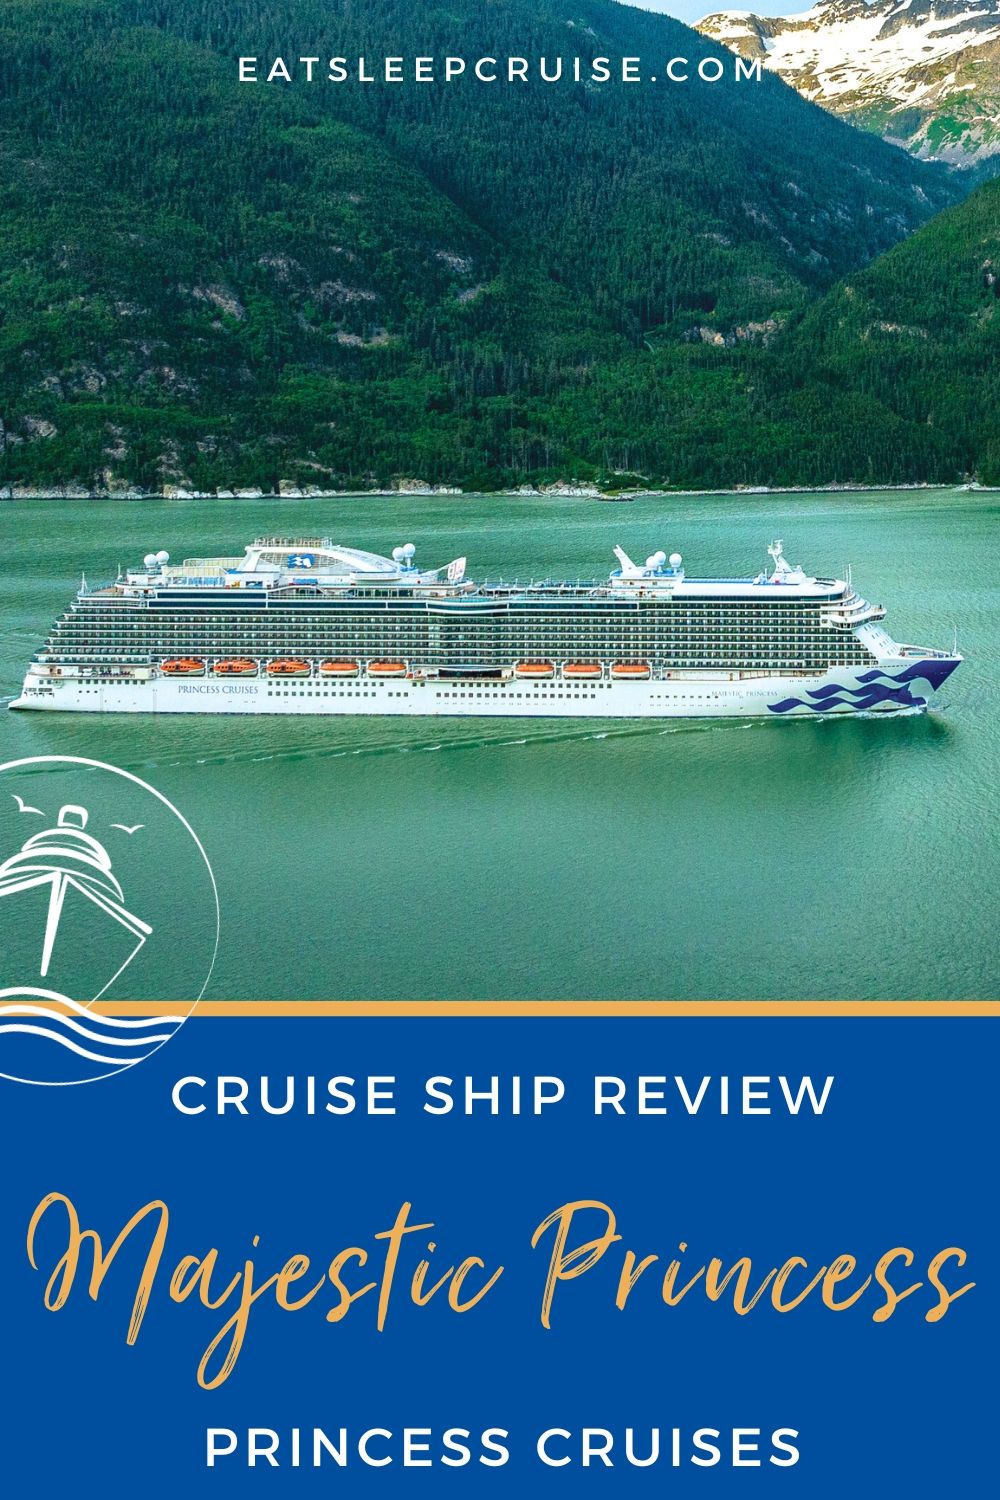 We Just Returned from an Alaska Cruise on Majestic Princess